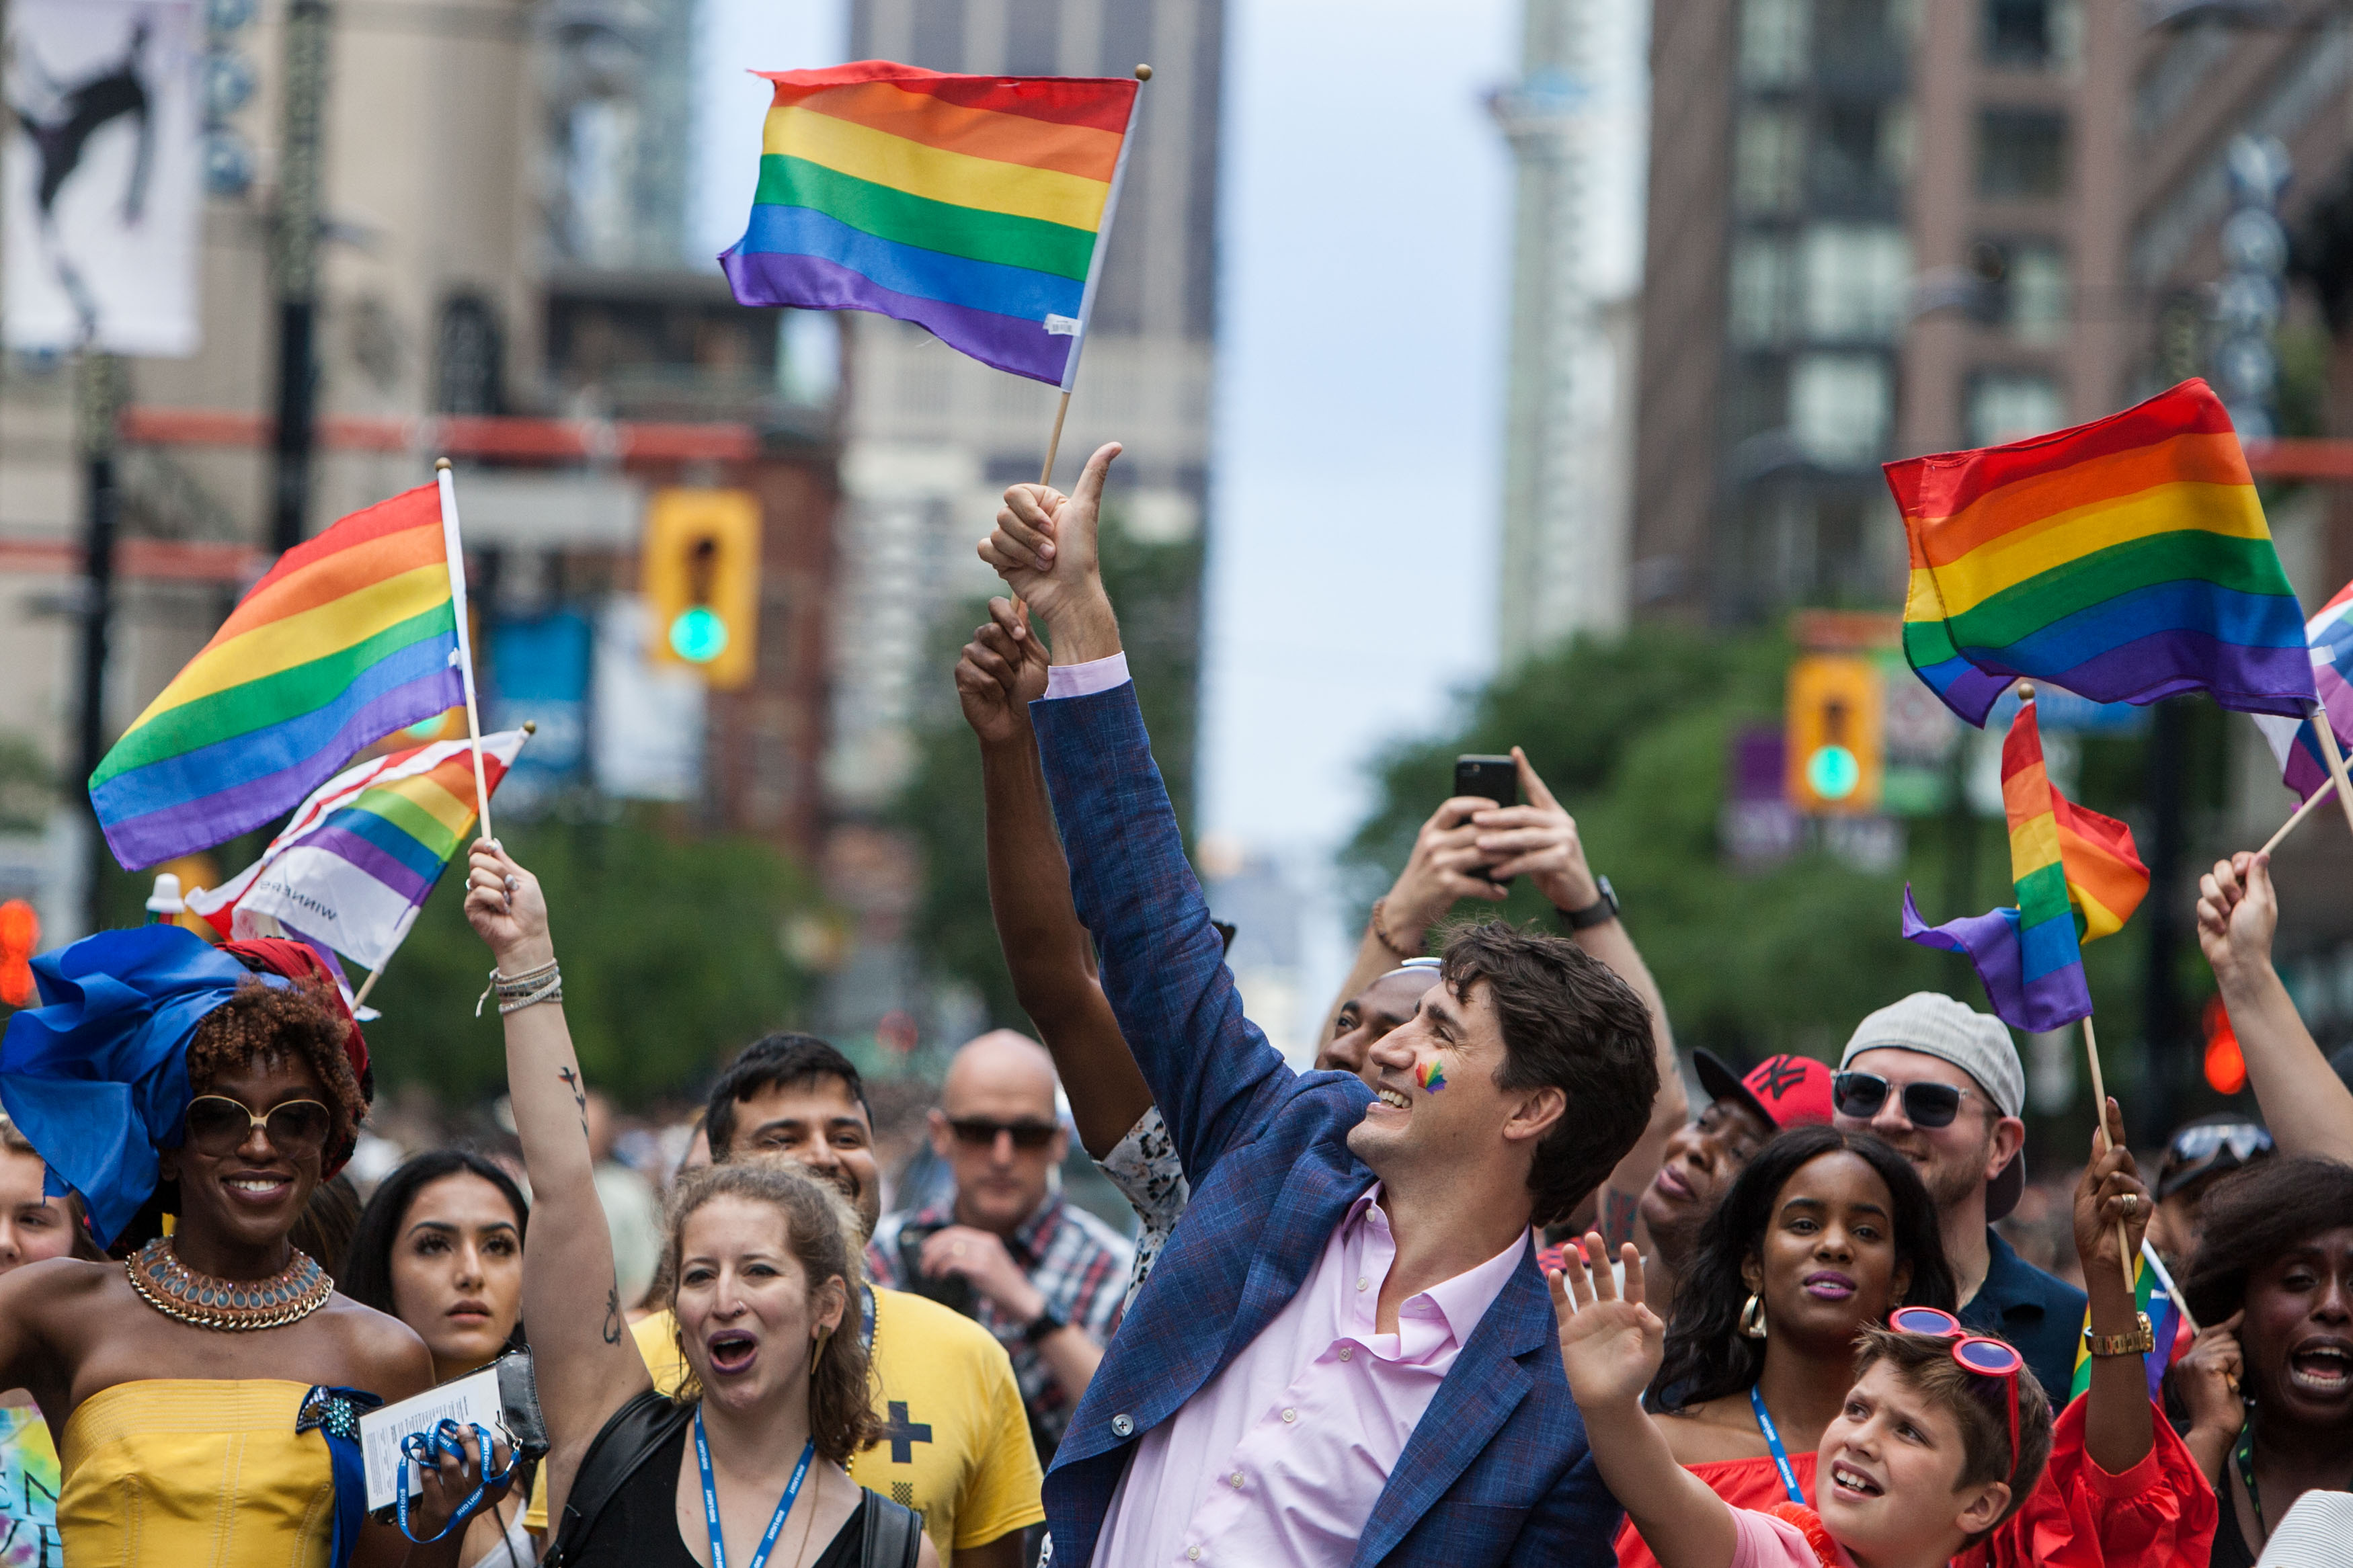 Justin Trudeau gives the crowd a thumbs-up among participants waving rainbow flags at Pride Toronto in 2017.